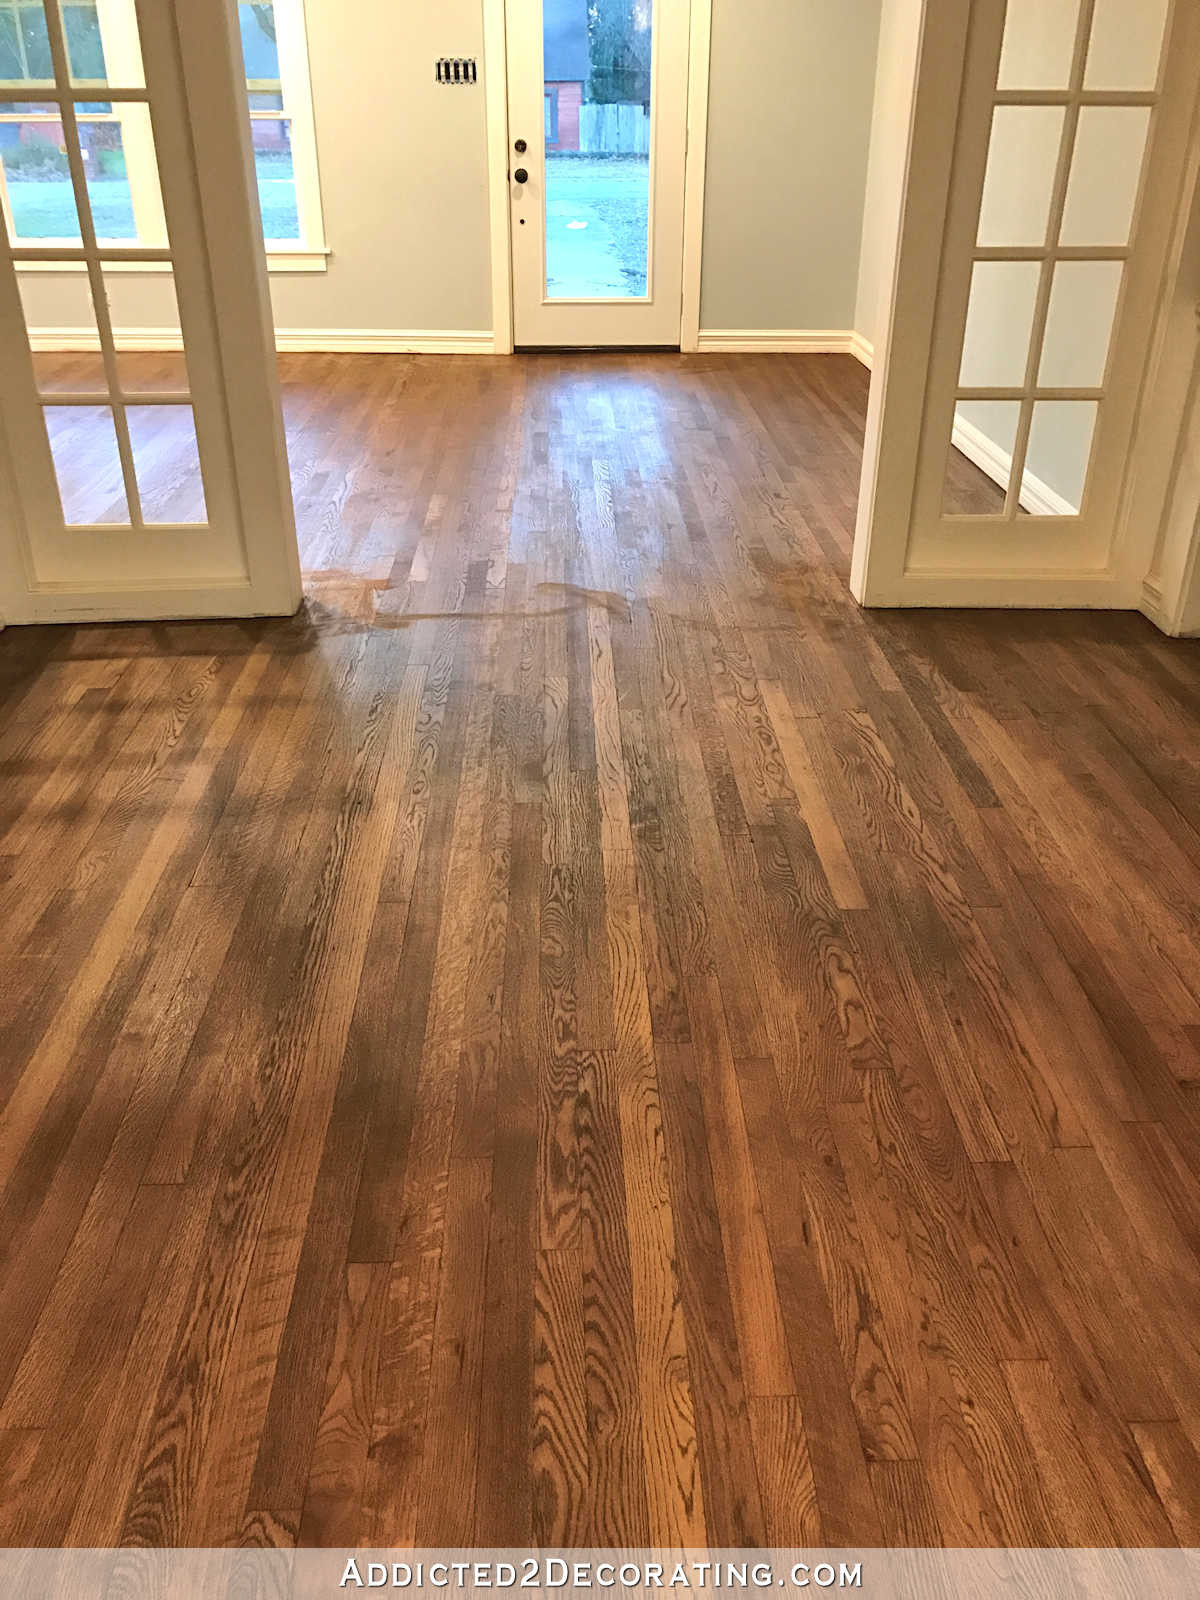 27 attractive How Difficult is It to Refinish Hardwood Floors 2023 free download how difficult is it to refinish hardwood floors of adventures in staining my red oak hardwood floors products process inside staining red oak hardwood floors 9 stain on entryway and music ro